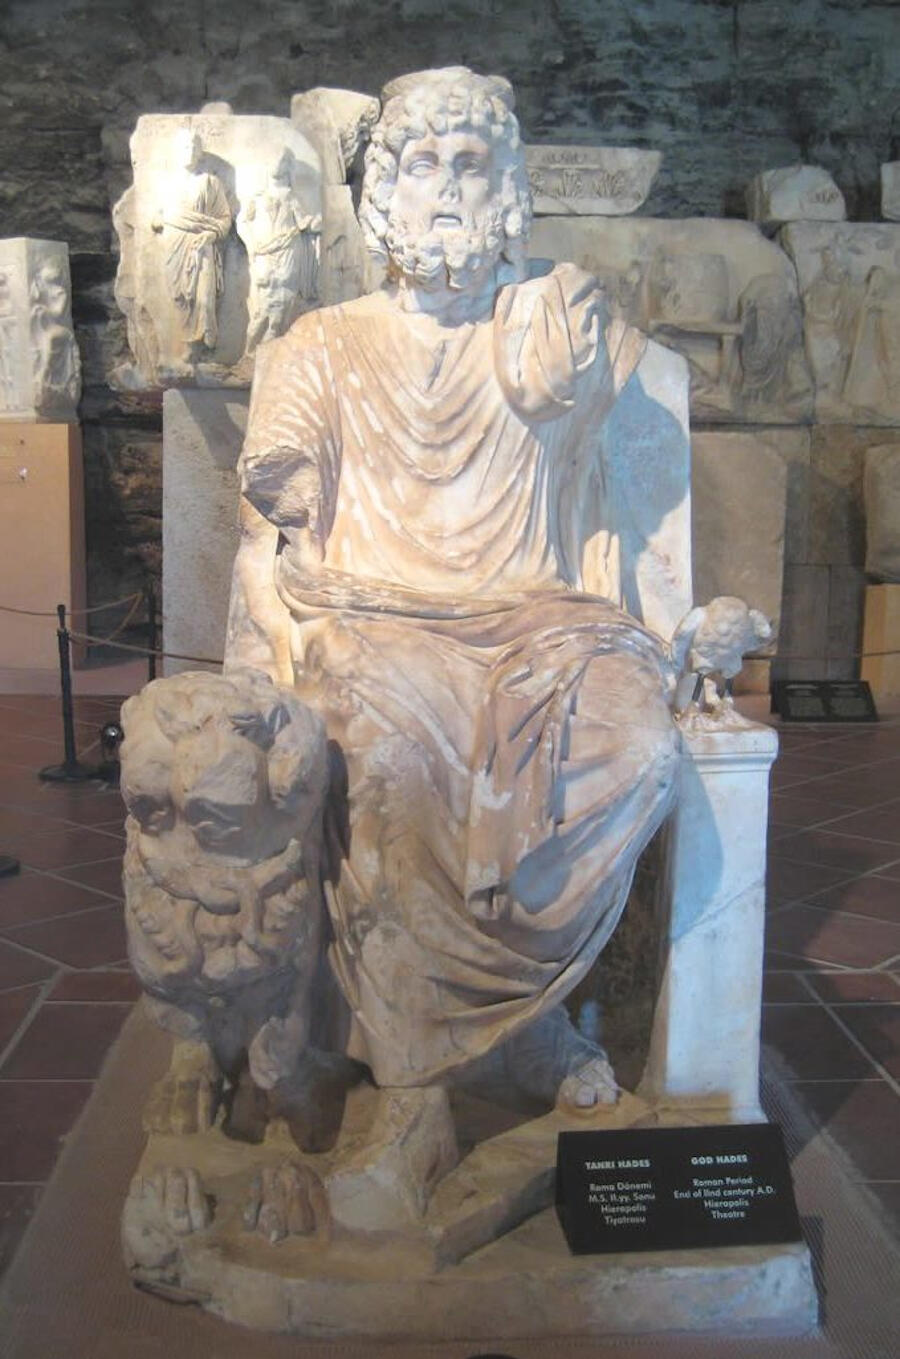 Hades enthroned, theatre of Hierapolis, Hierapolis Archeological Museum, © The Tourism Directorate of Denizli Directorate of Pamukkale Tourist Information